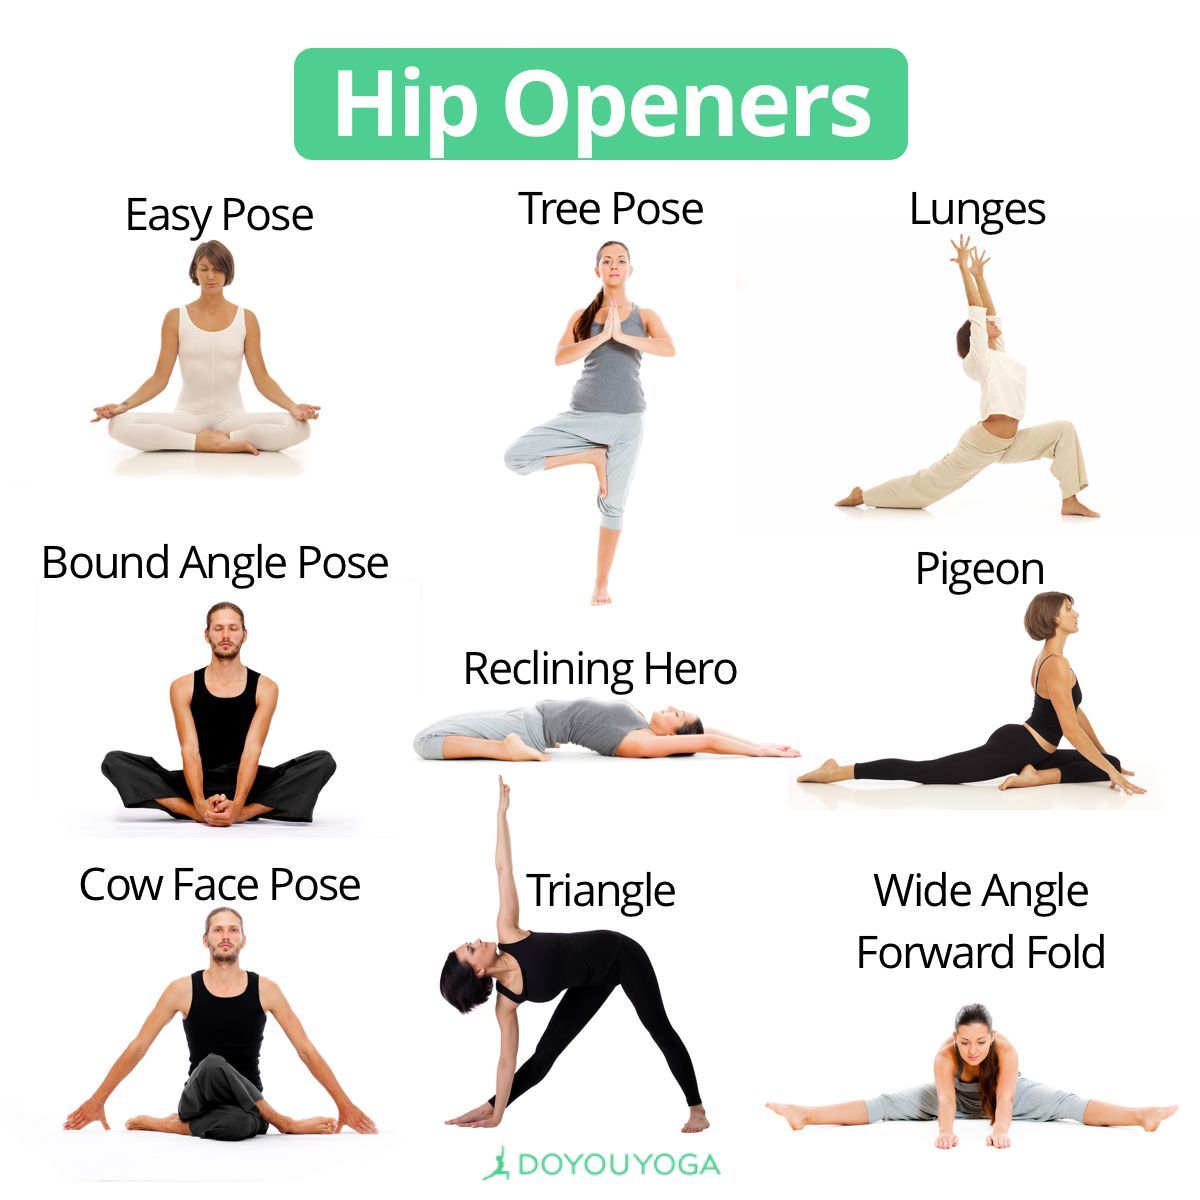 Allllllllllllll the stretches to release your #tighthips! 🤗

What are your favorite #hipopeners? 😍